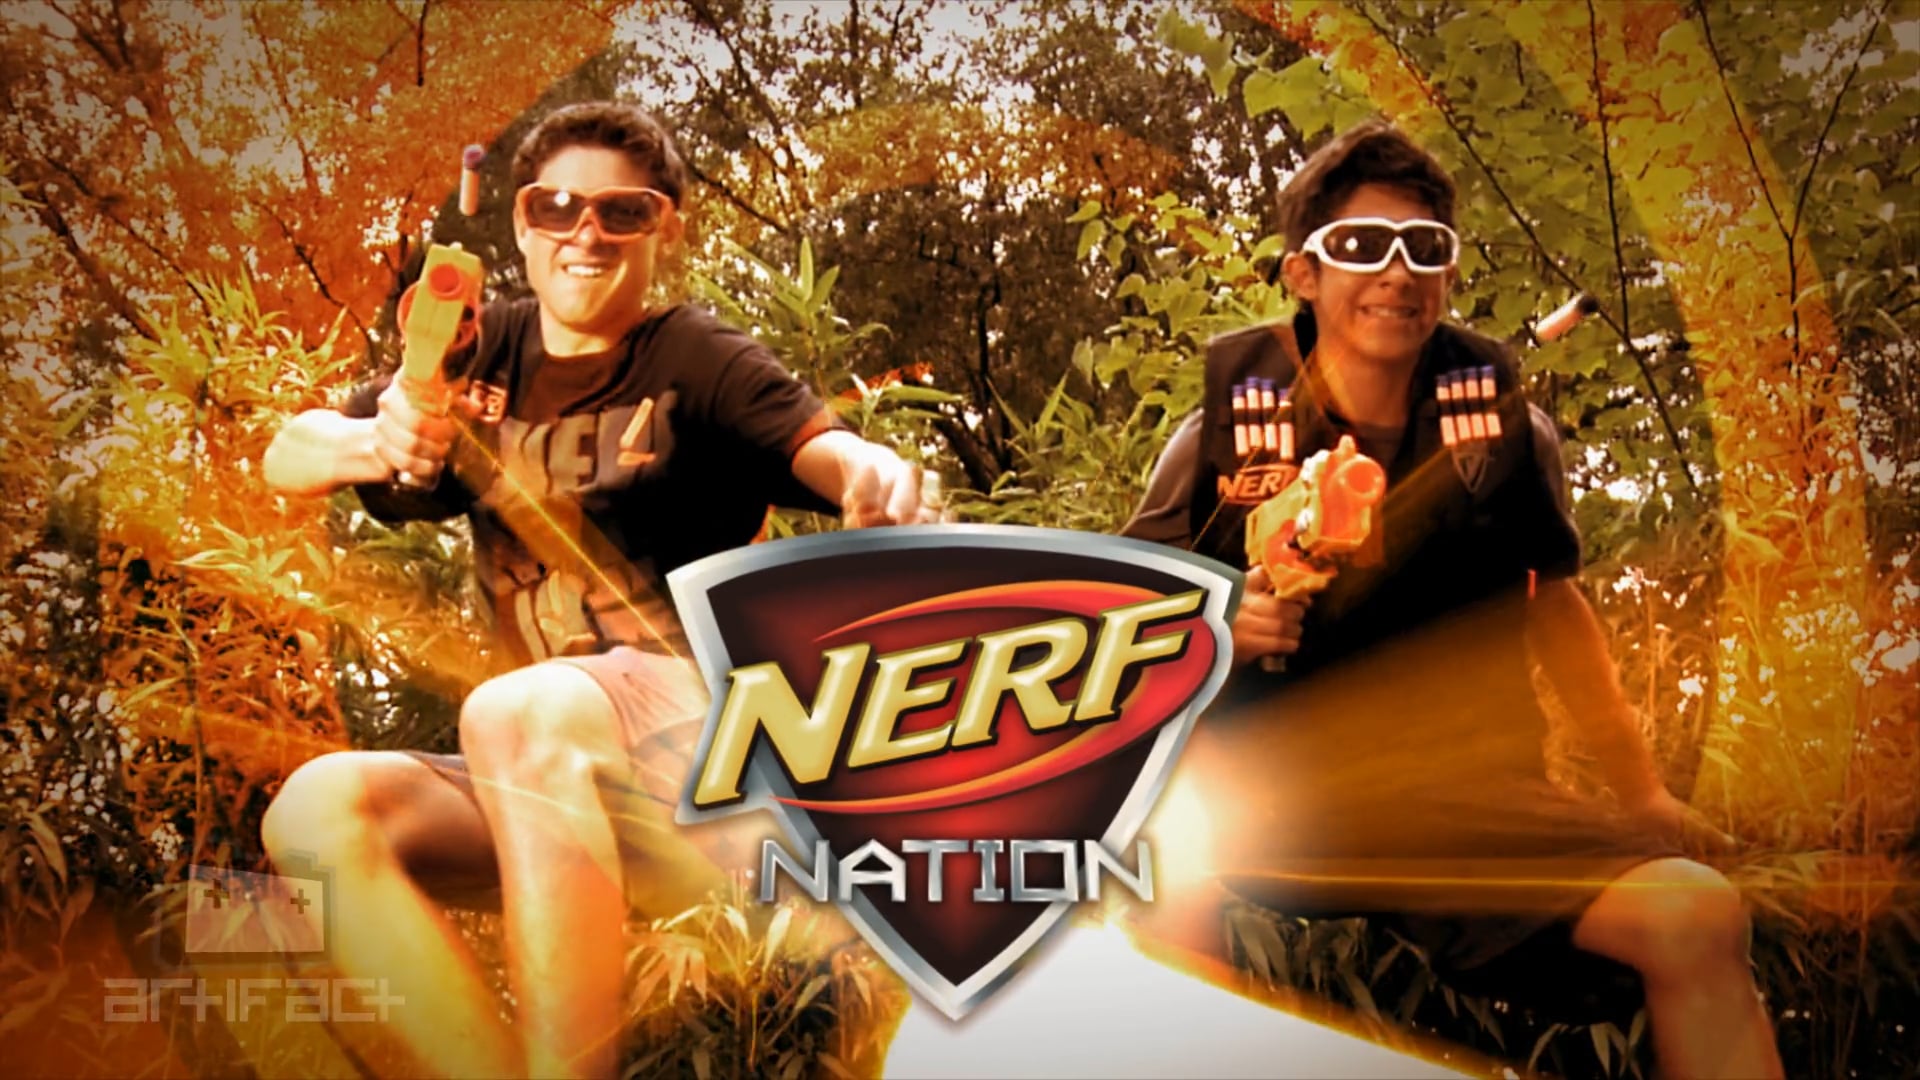 NERF Nation (2012) Lensed by Jose A. Acosta for Artifact and Cartoon Network.